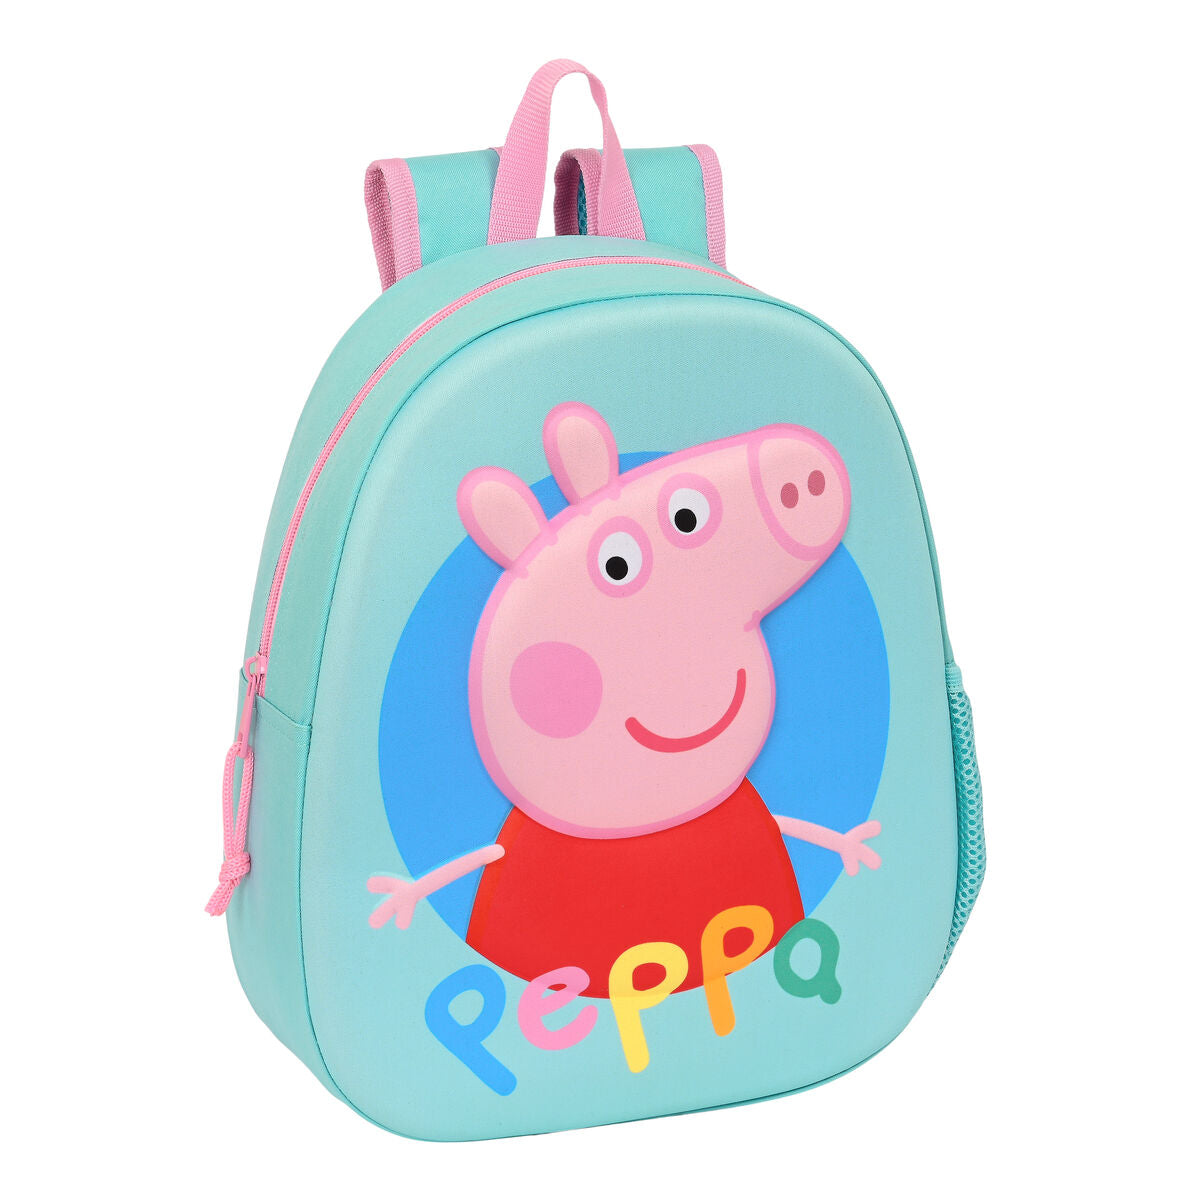 Peppa Pig Kids Purse With Socks & Plate, Peppa Pig Coin Pouch,Official  Licensed! | eBay